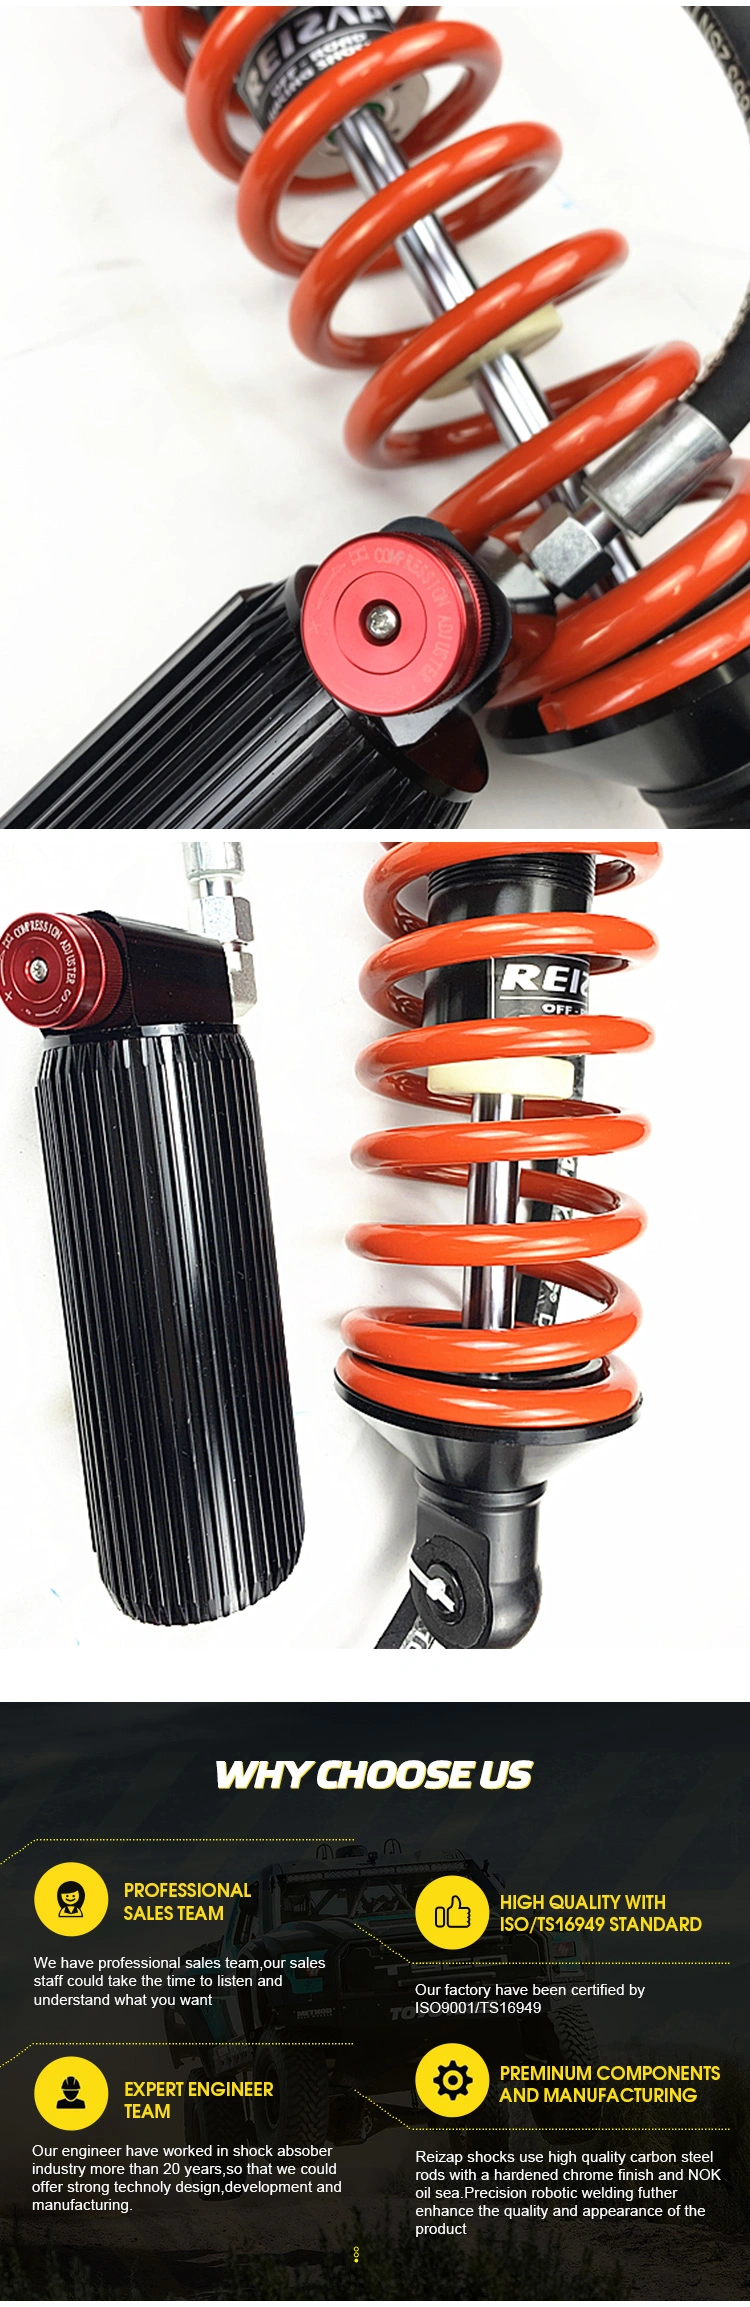 off Road Shocks 14" Storke Length Adjustable Car Parts Coil Over Auto Shock Absorbers